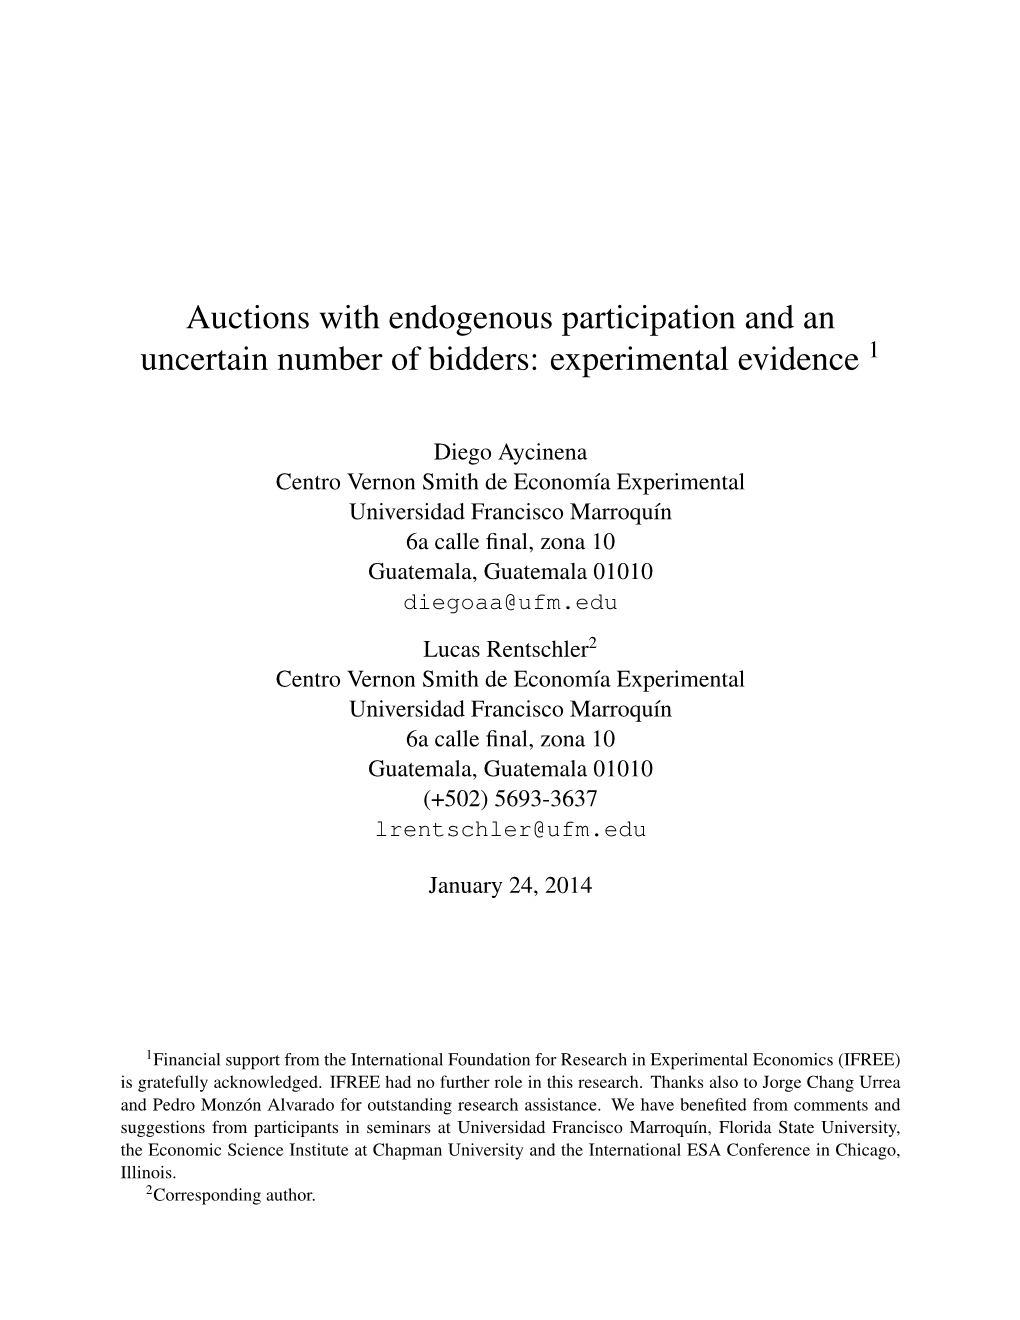 Auctions with Endogenous Participation and an Uncertain Number of Bidders: Experimental Evidence 1